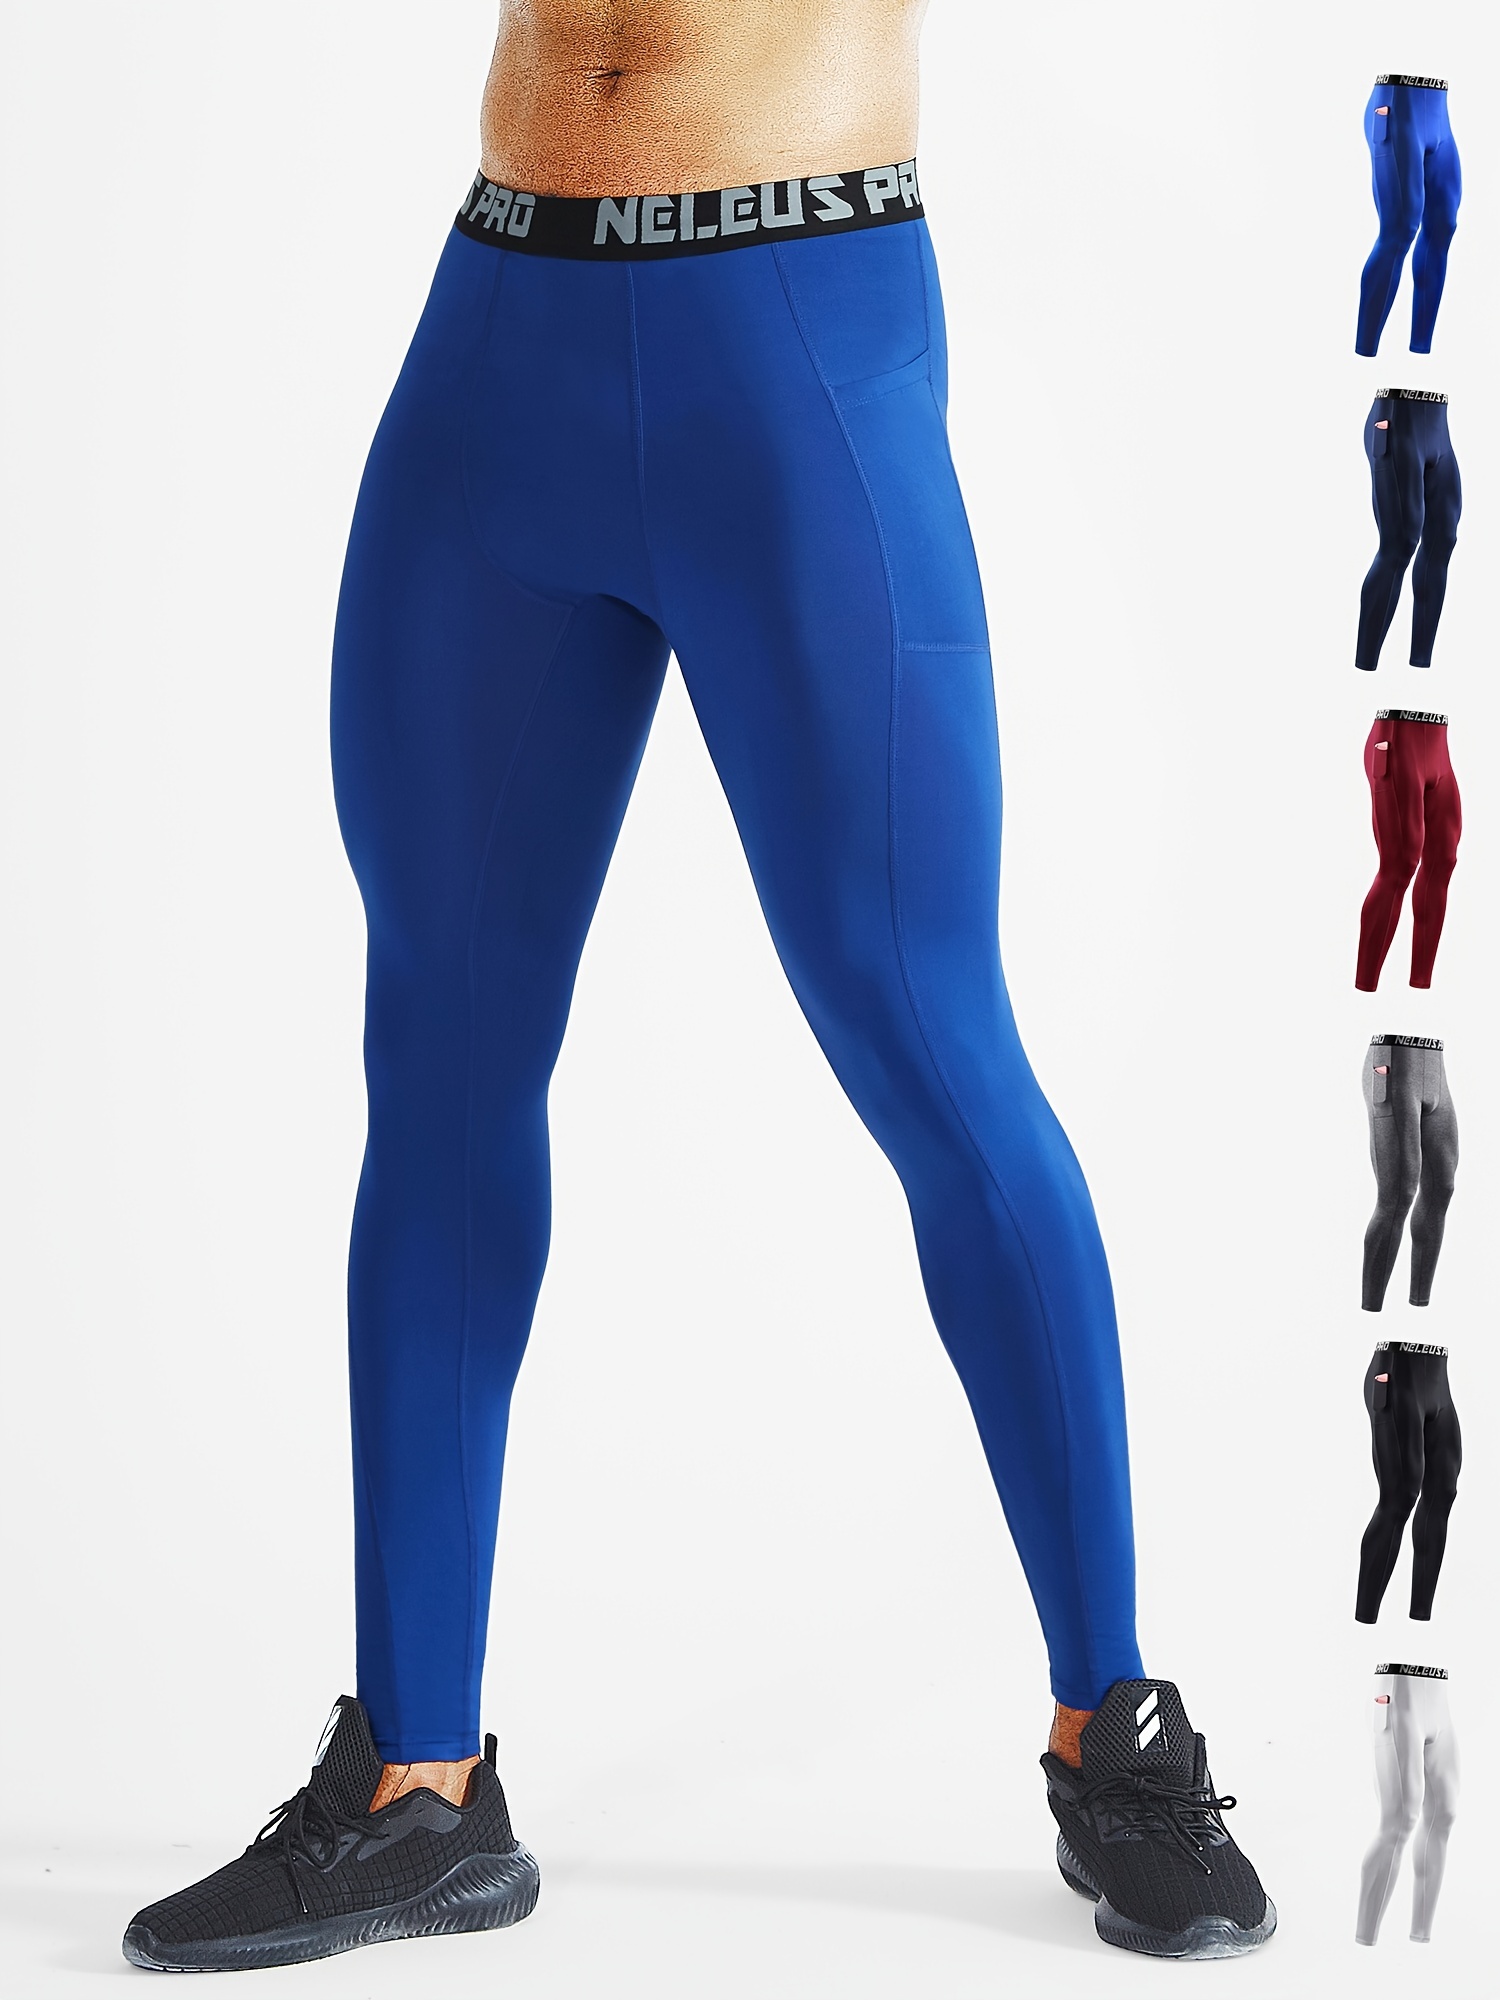 Quick Drying Compression Leggings For Men Full Length Running Decathlon  Track Pants, Basketball, Volleyball, And Fitness Decathlon Track Pants  Style X0824 From Fashion_official01, $9.68